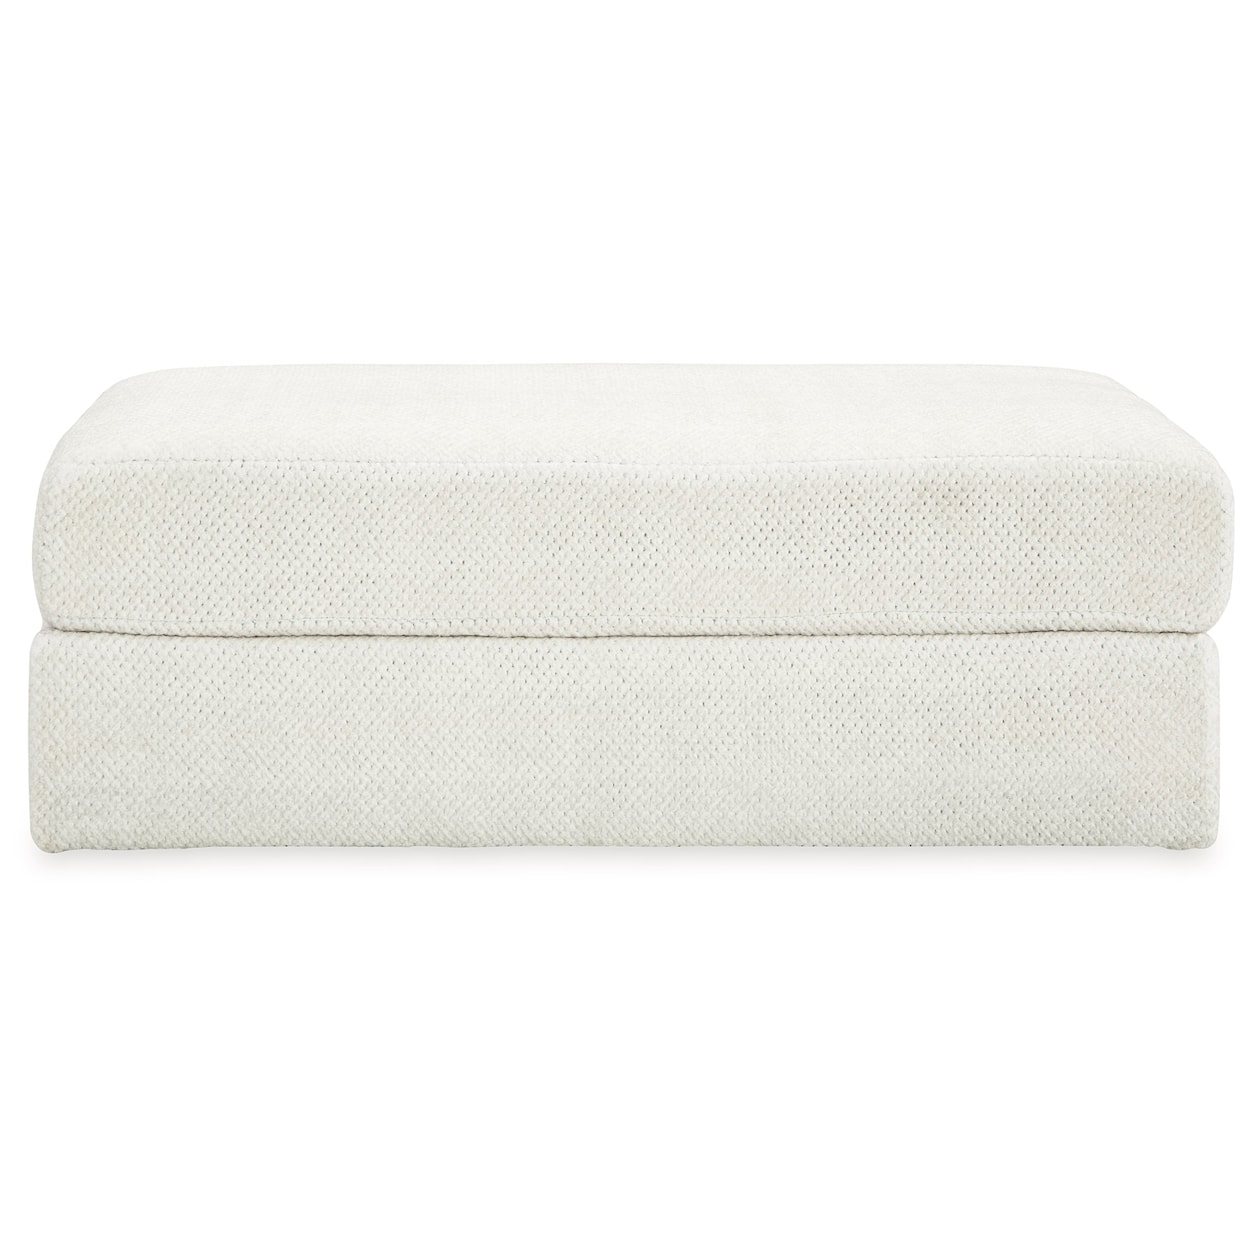 Signature Design by Ashley Karinne Oversized Accent Ottoman